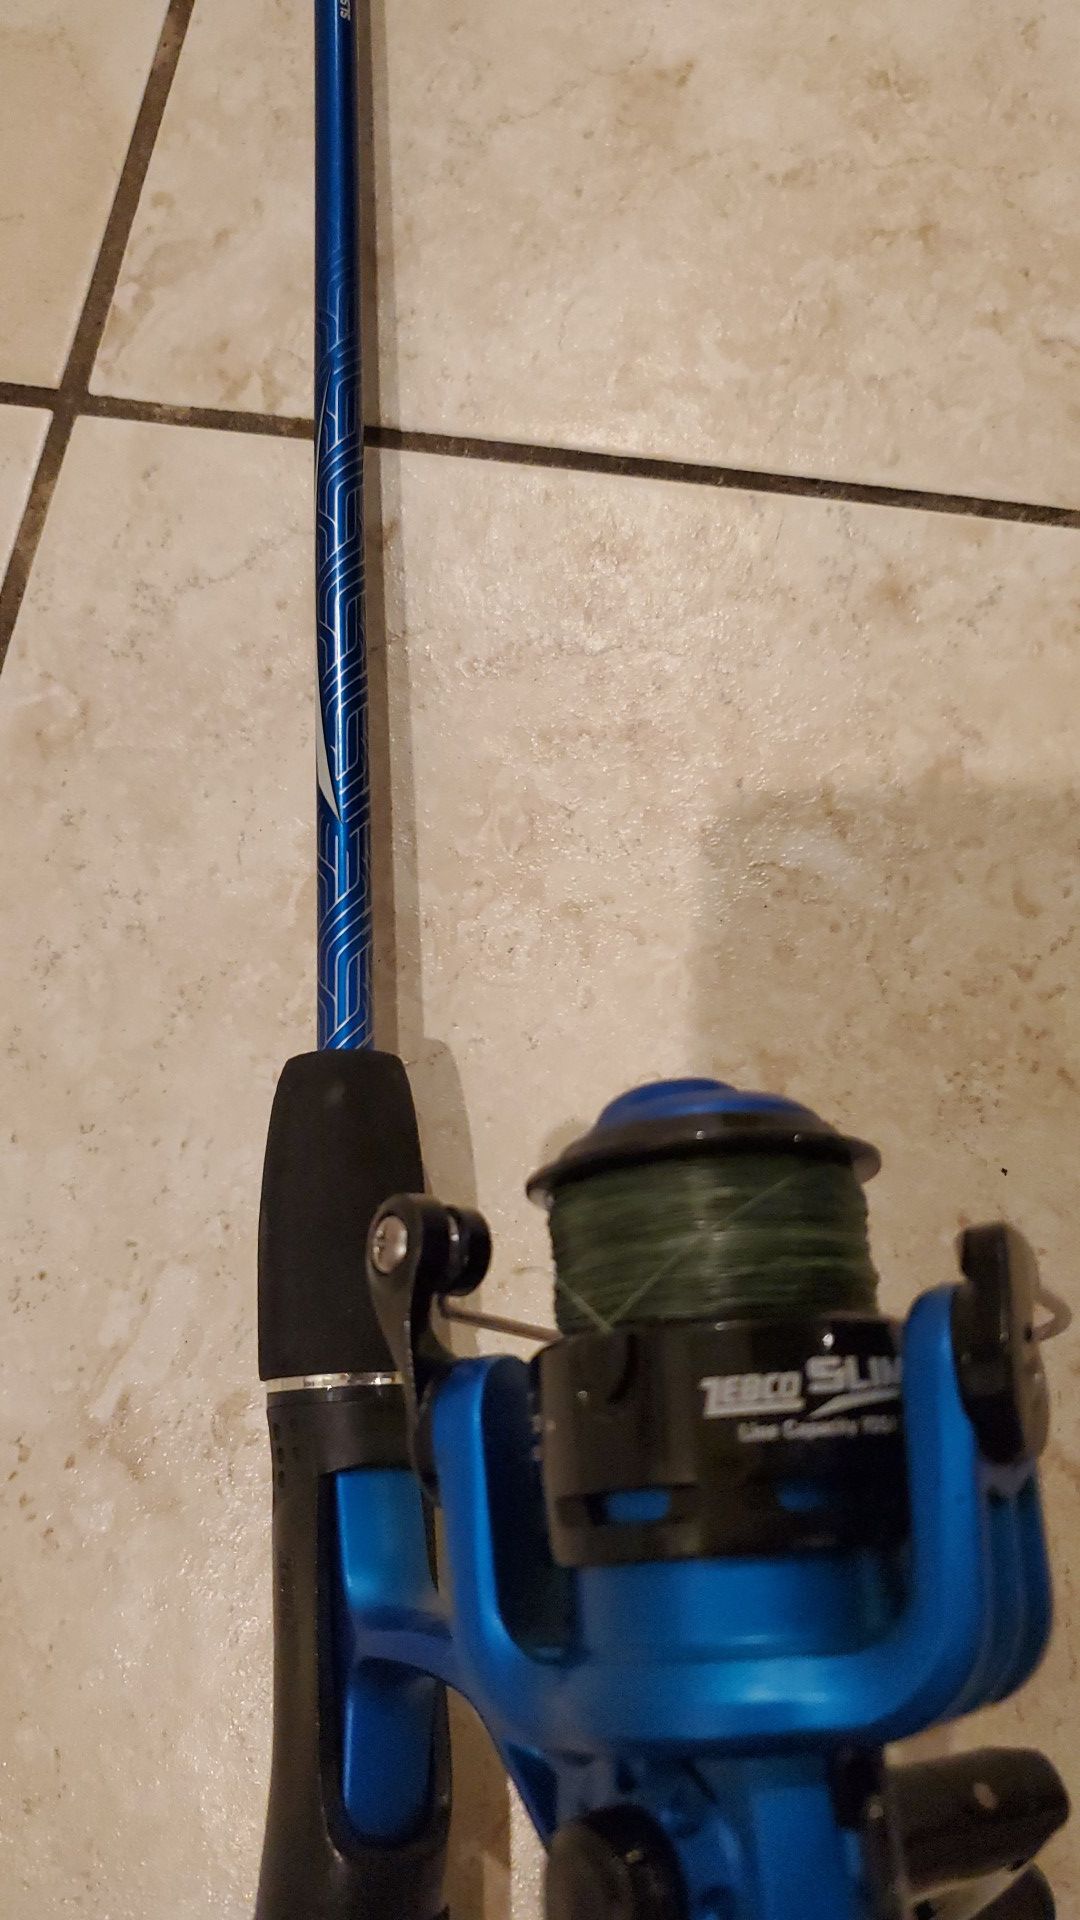 Brand New Zebco Slingshot Fishing Reel & Rod combo setup braid ready to fish  5'6 Pole for Sale in Fort Lauderdale, FL - OfferUp